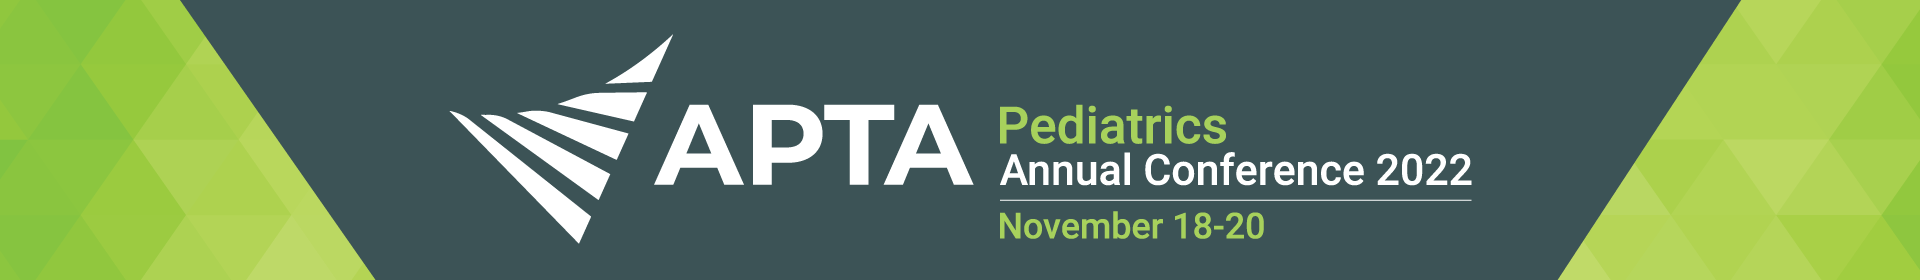 2022 APTA Pediatrics Annual Conference Educational Sessions Event Banner